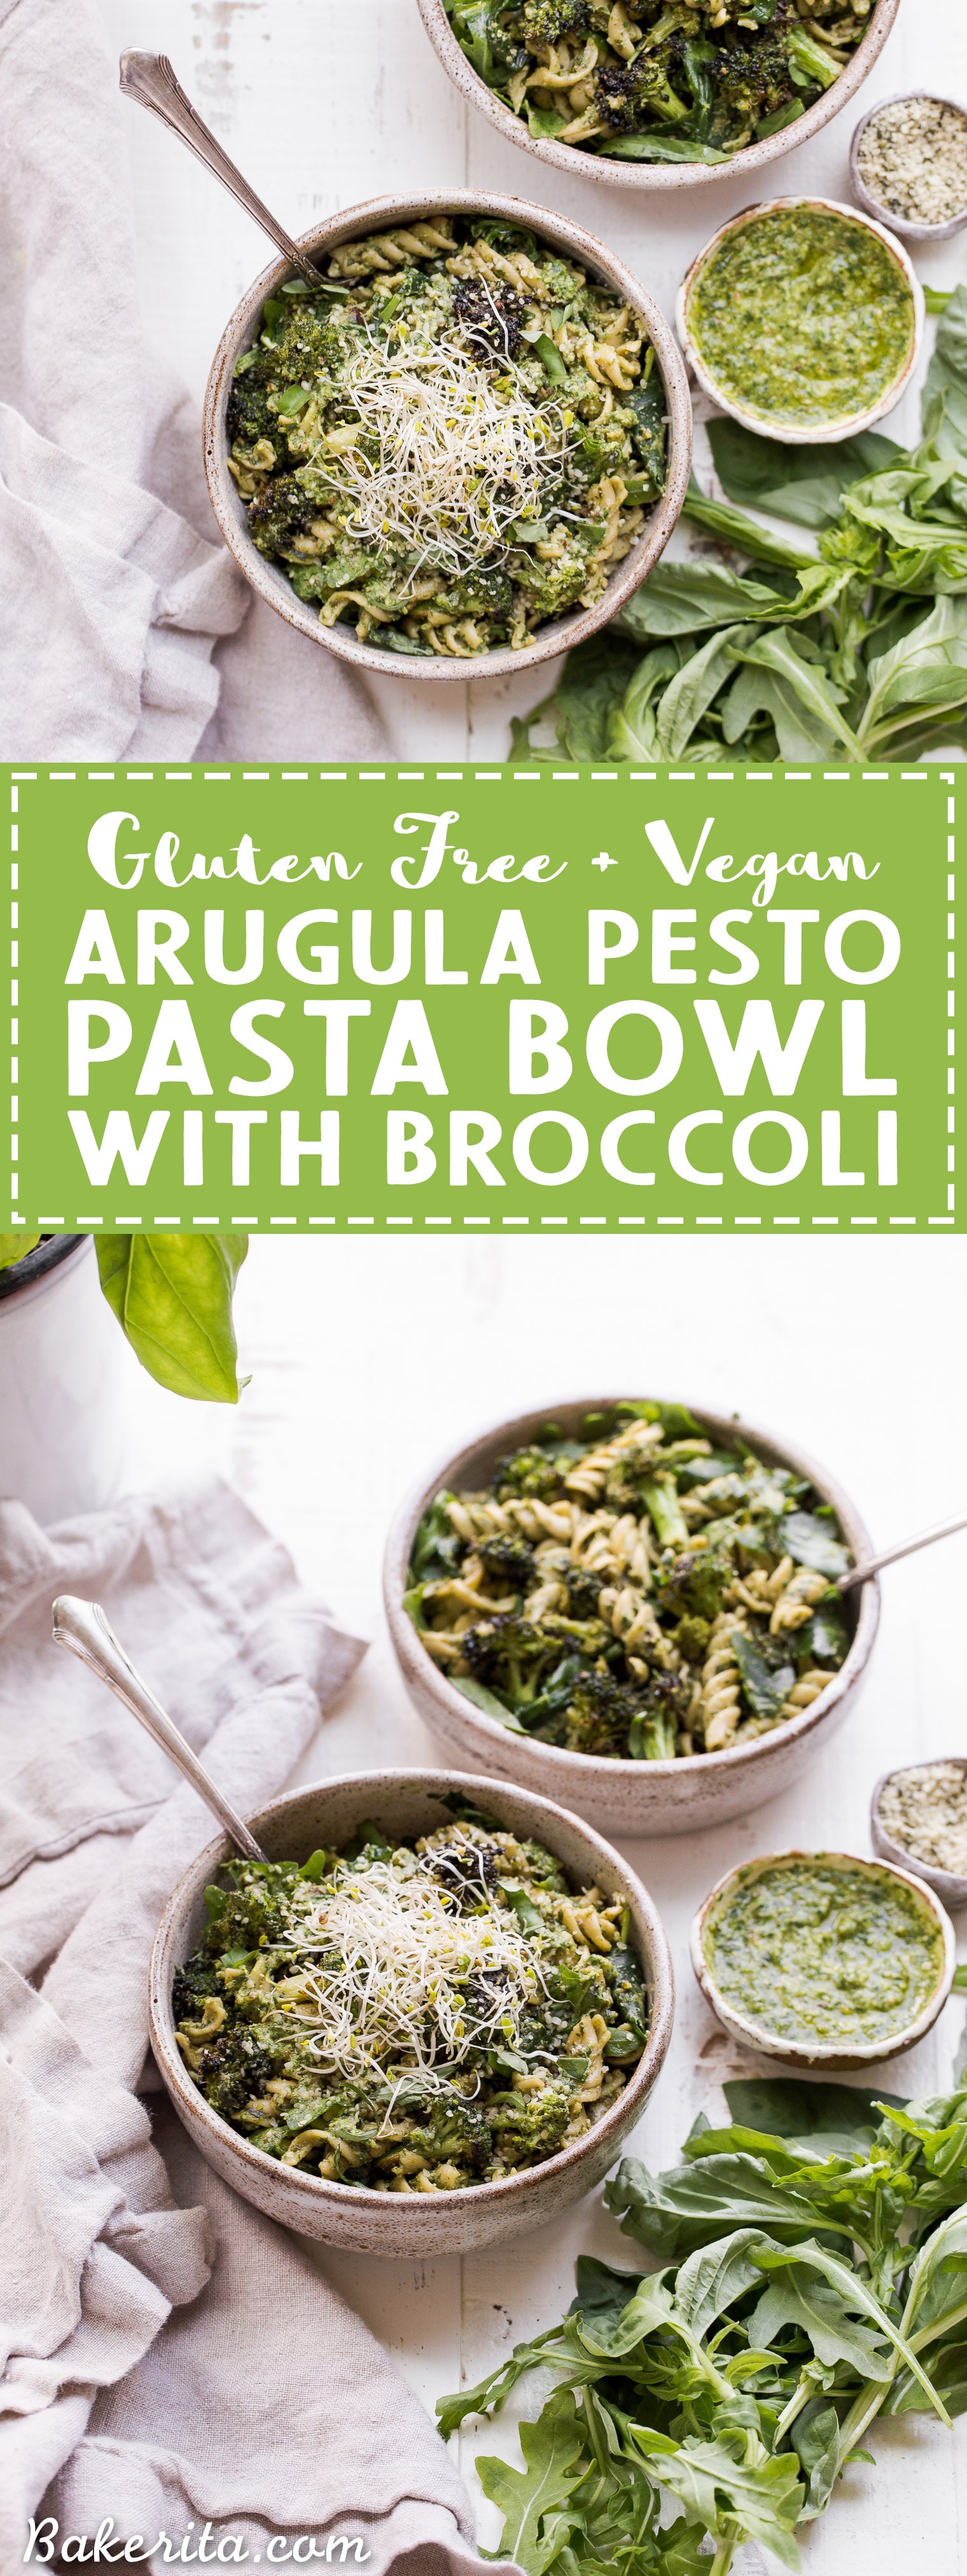 This Arugula Pesto Pasta Bowl with Broccoli is one of my favorite quick and easy go-to meals! It's filling, nutritious, and simple to make in just 30 minutes. You're going to want to put the homemade dairy-free arugula pesto on everything!